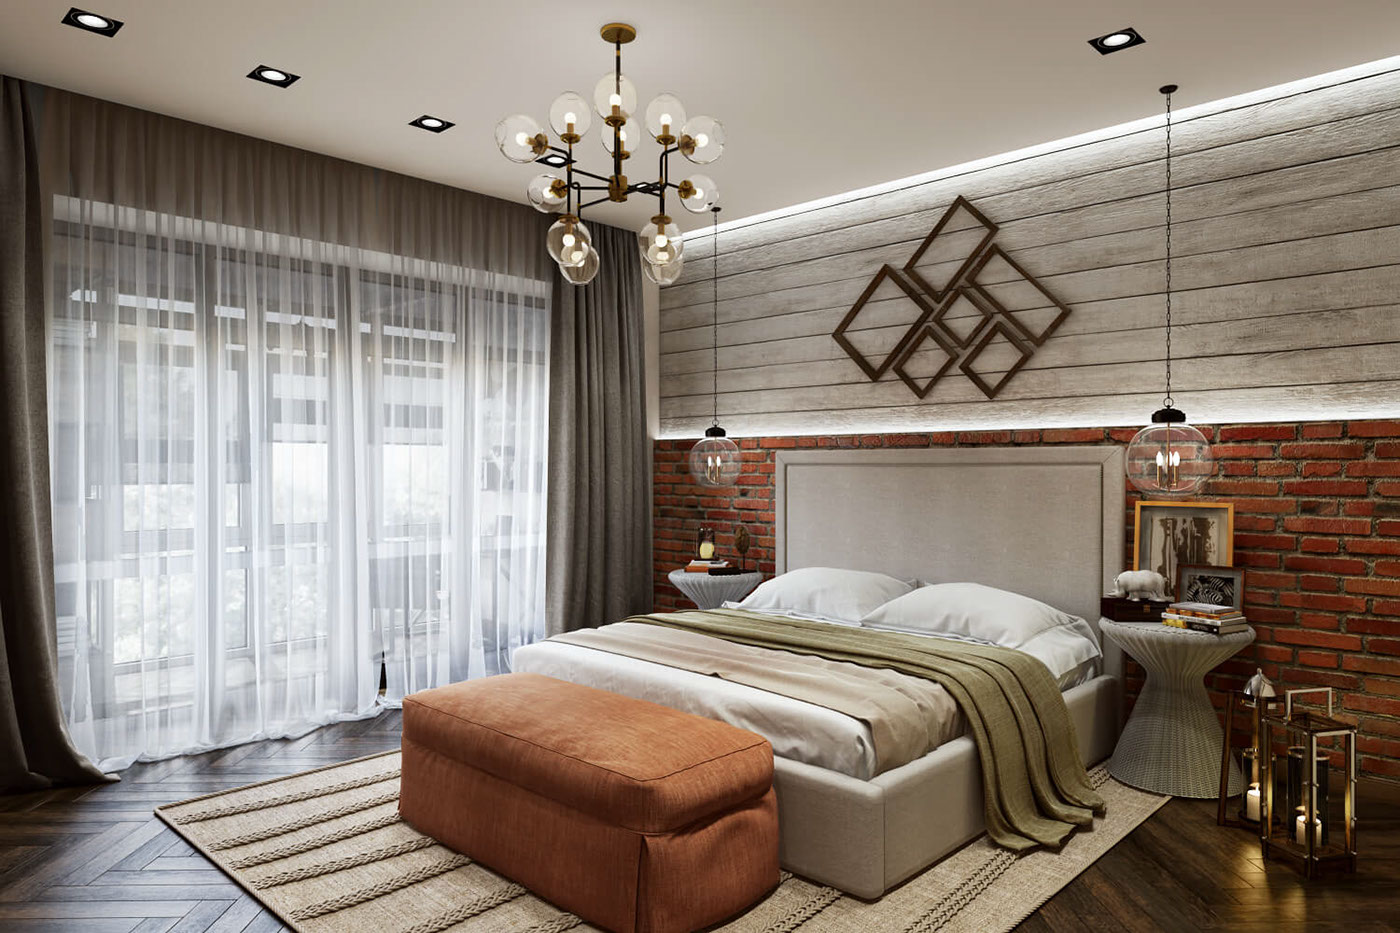 3d Rendering for a contemporary bedroom design. on Behance